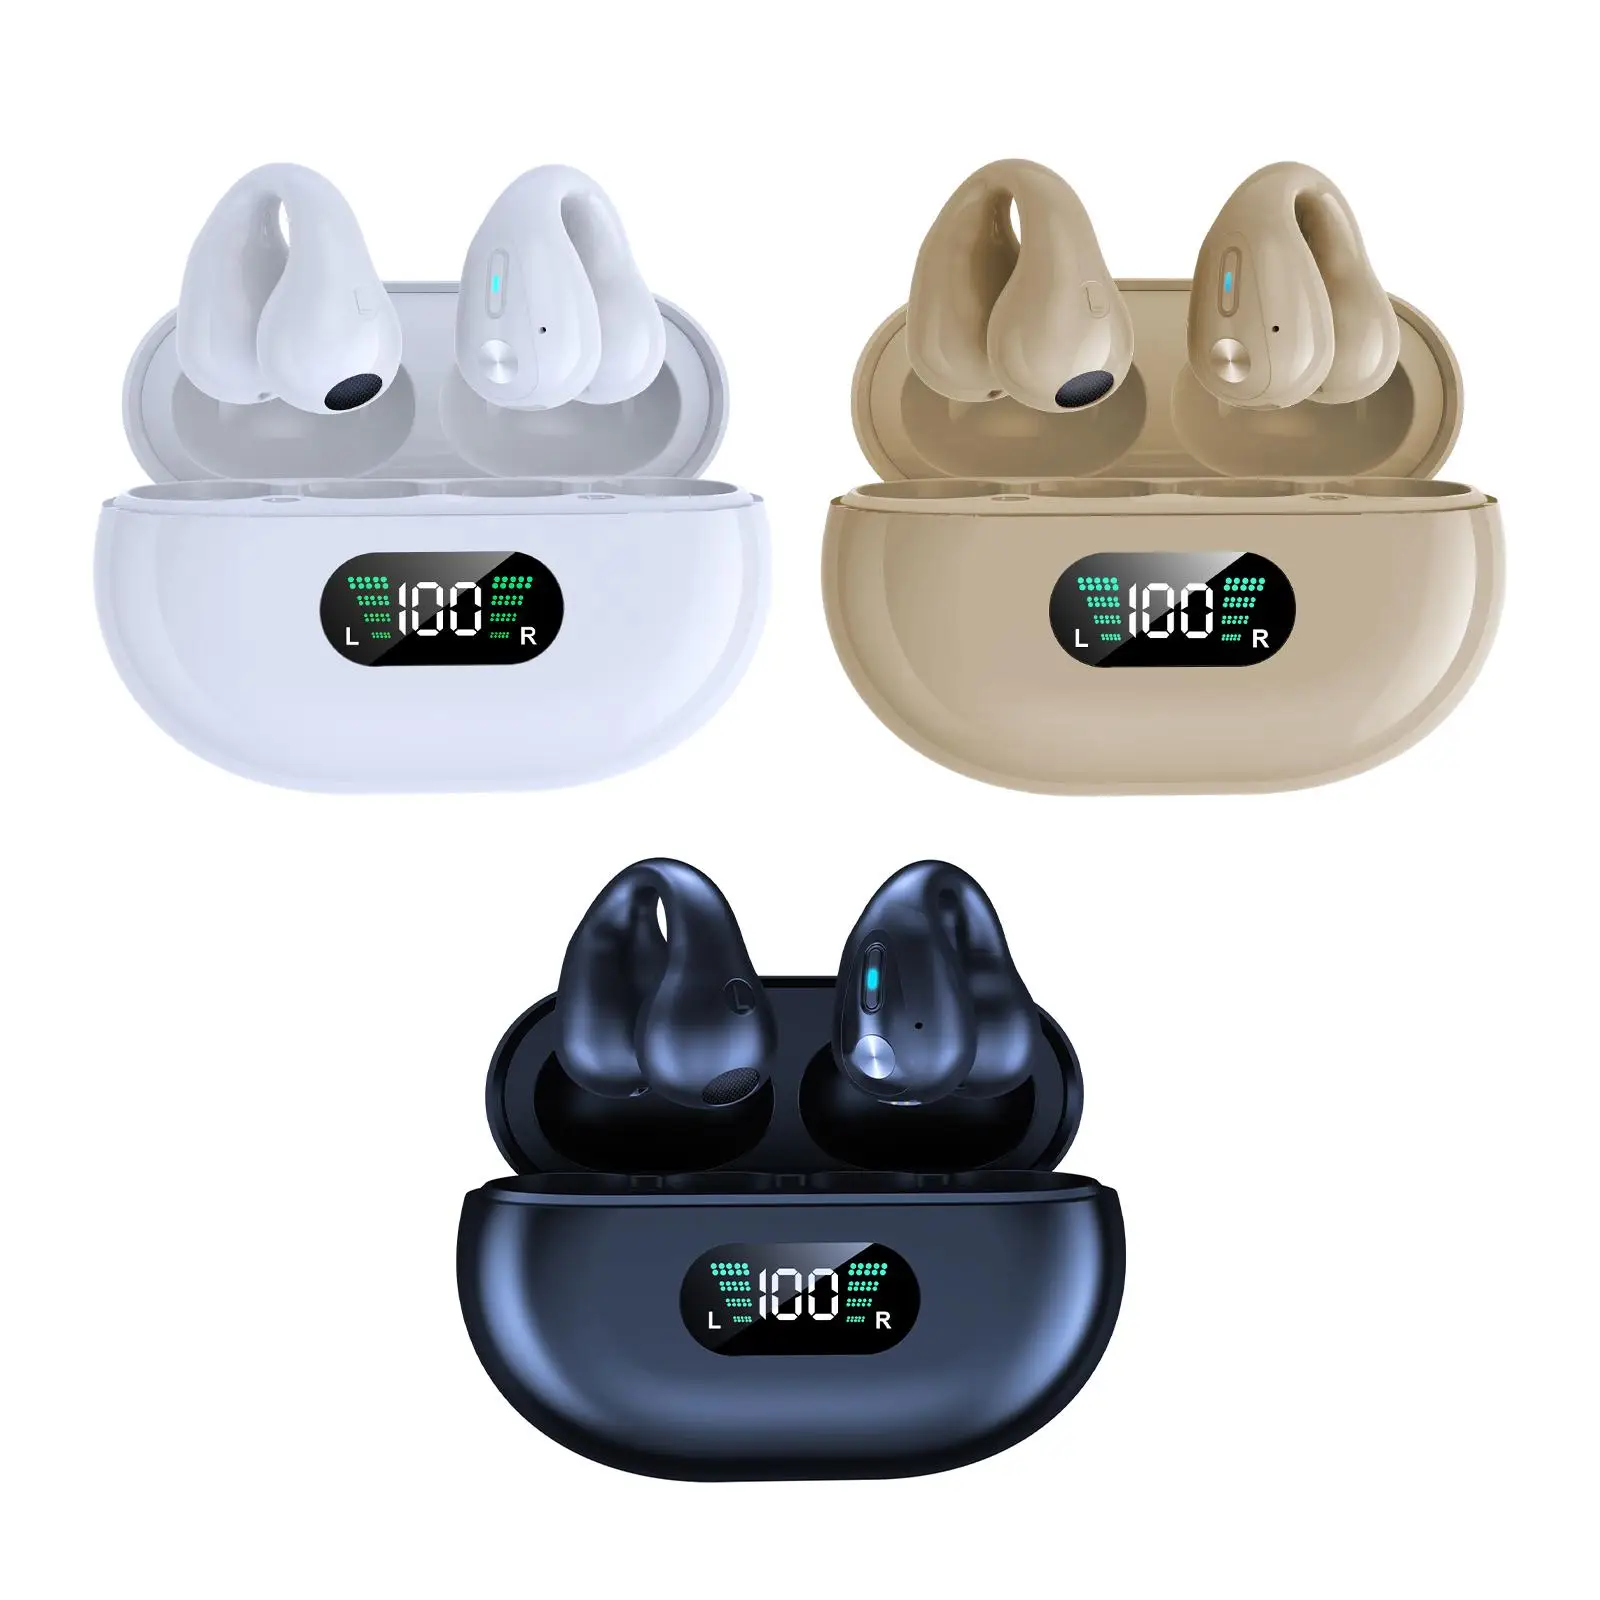 Auto Pairing Ear Clip Headphones Noise Cancelling Headsets for Running Yoga Sports Gym